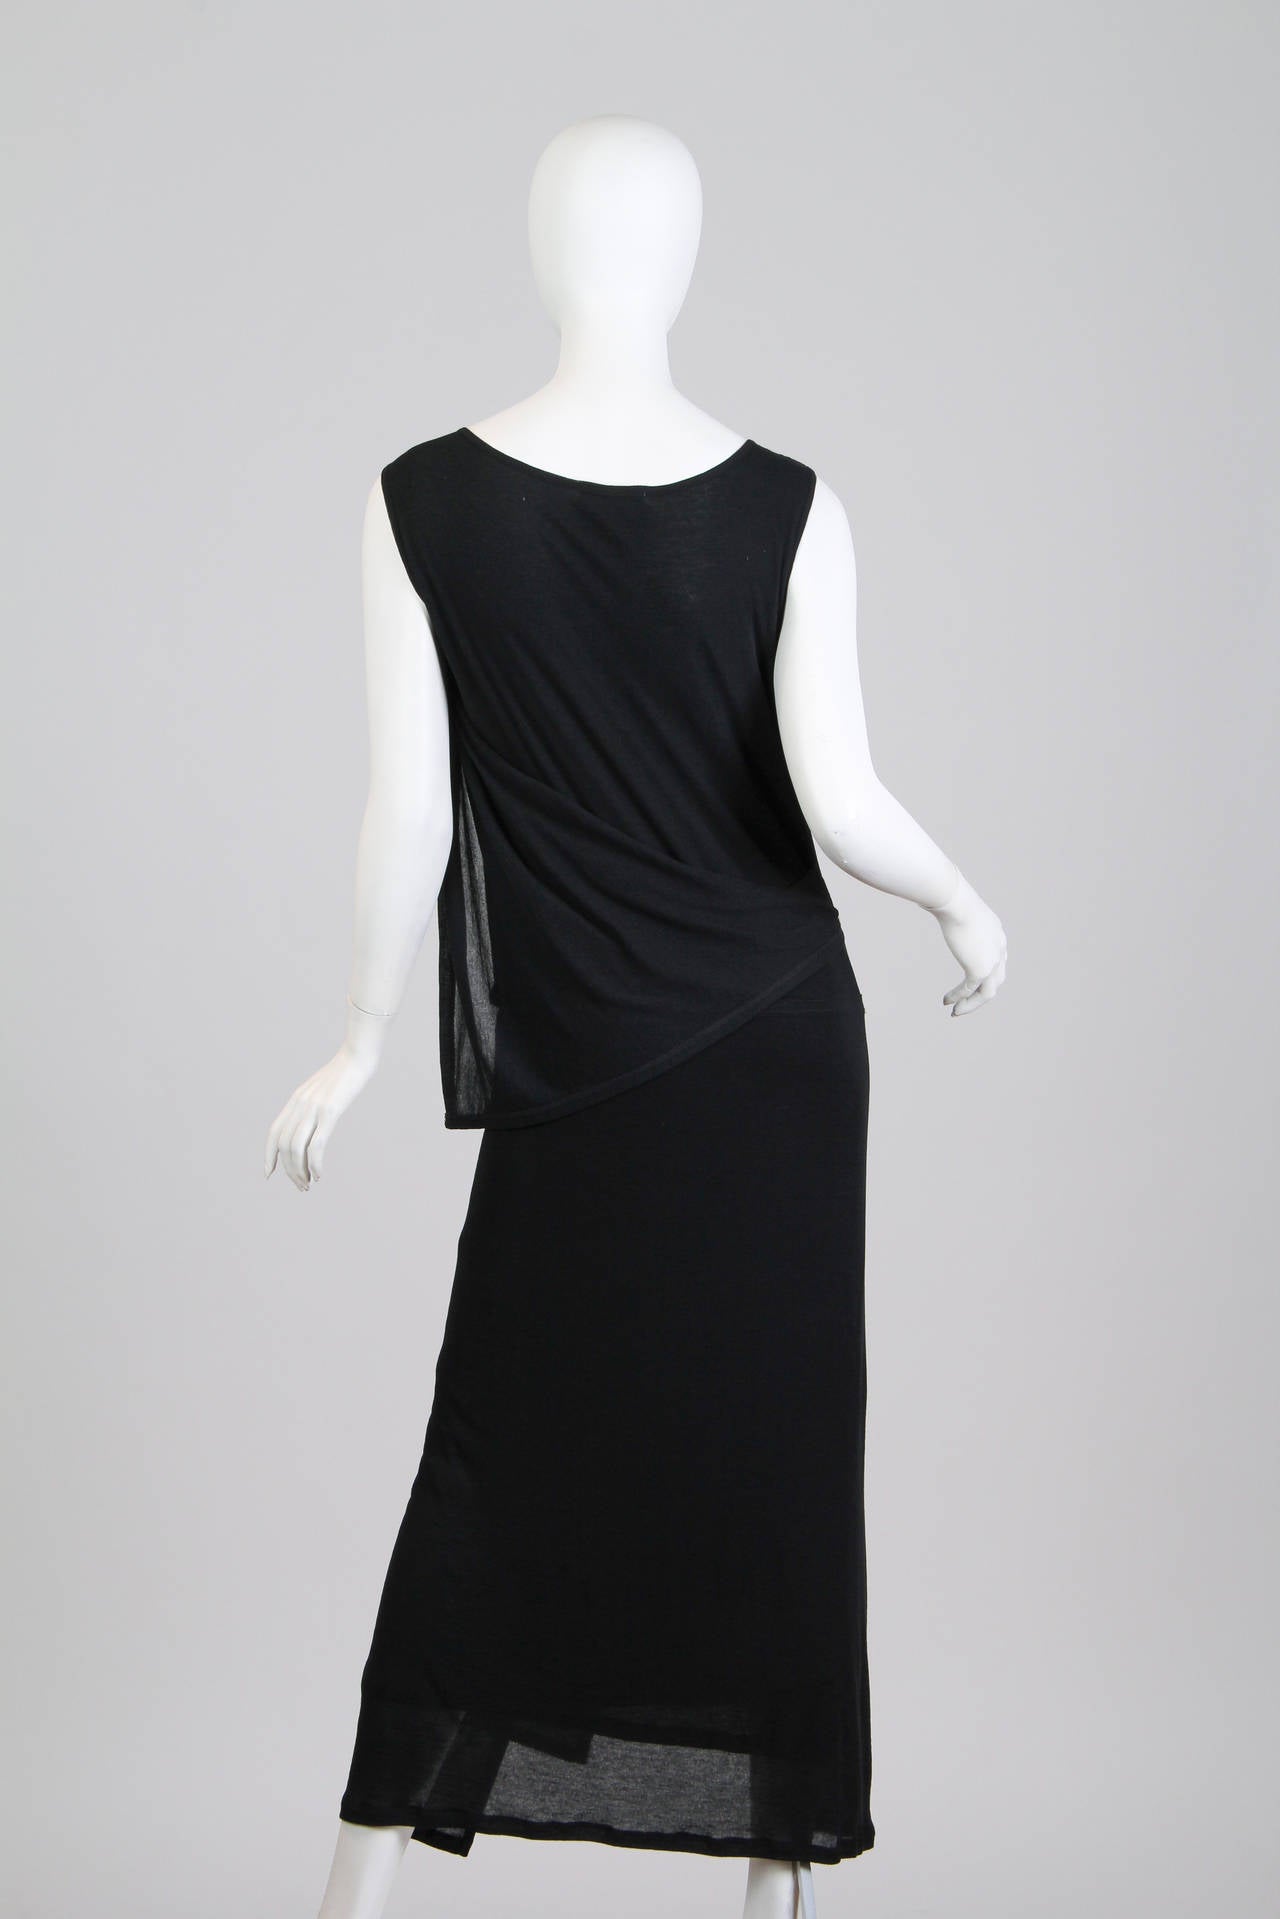 Issey Miyake Draped Cotton Jersey Dress For Sale at 1stdibs